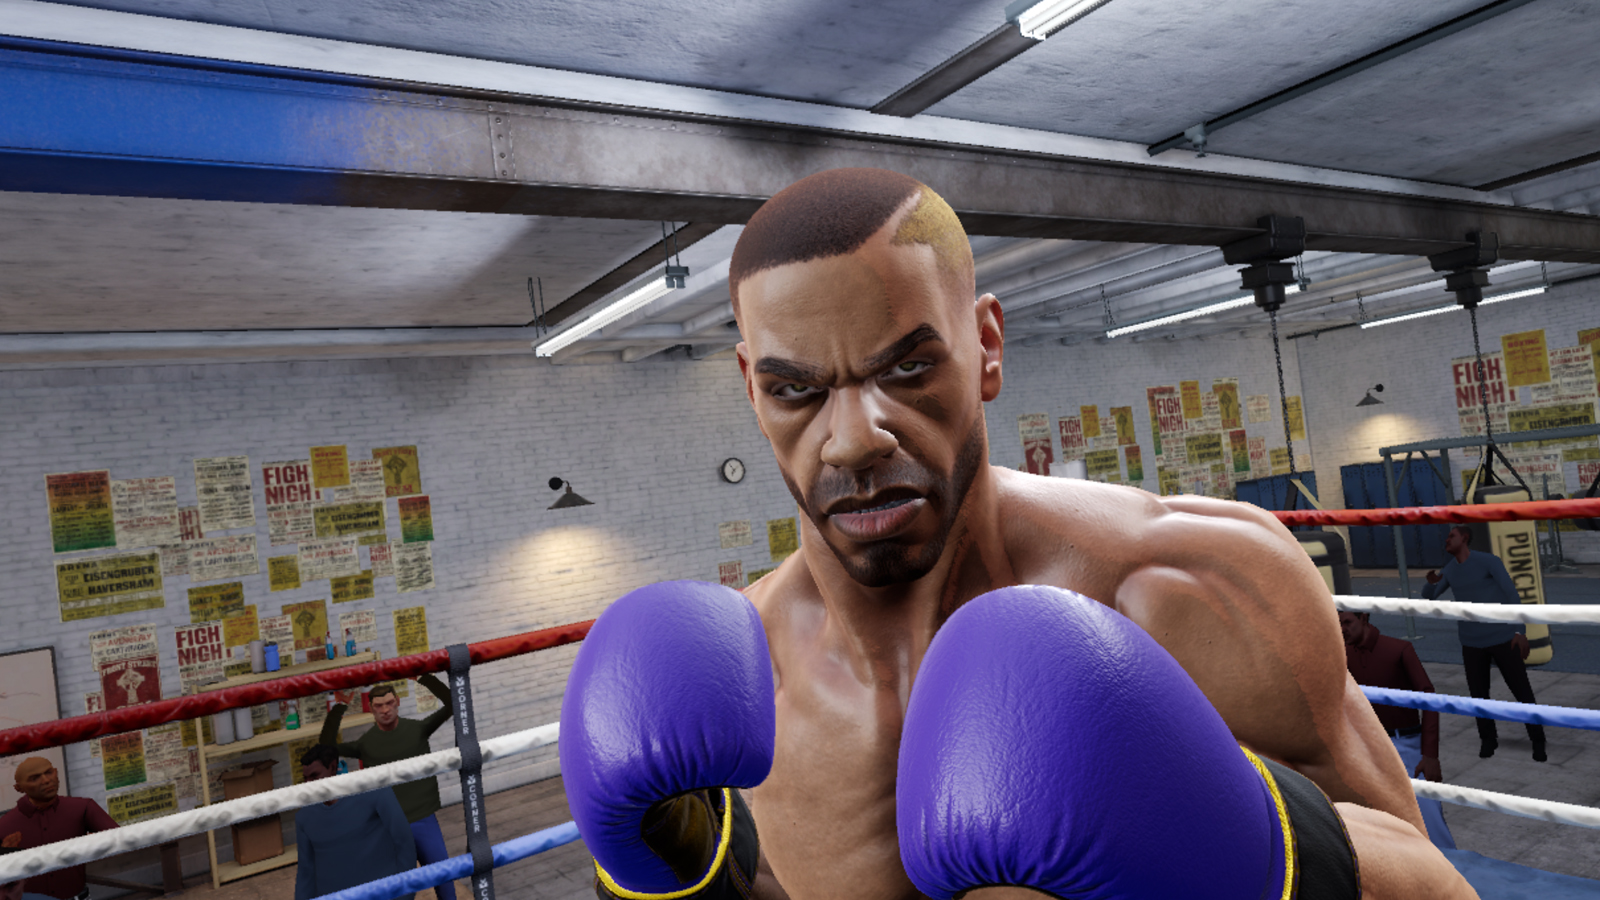 Rise to glory vr. Creed Rise to Glory. Крид Райс ту Глори. Creed VR. Creed Rise to Glory VR трейлер.